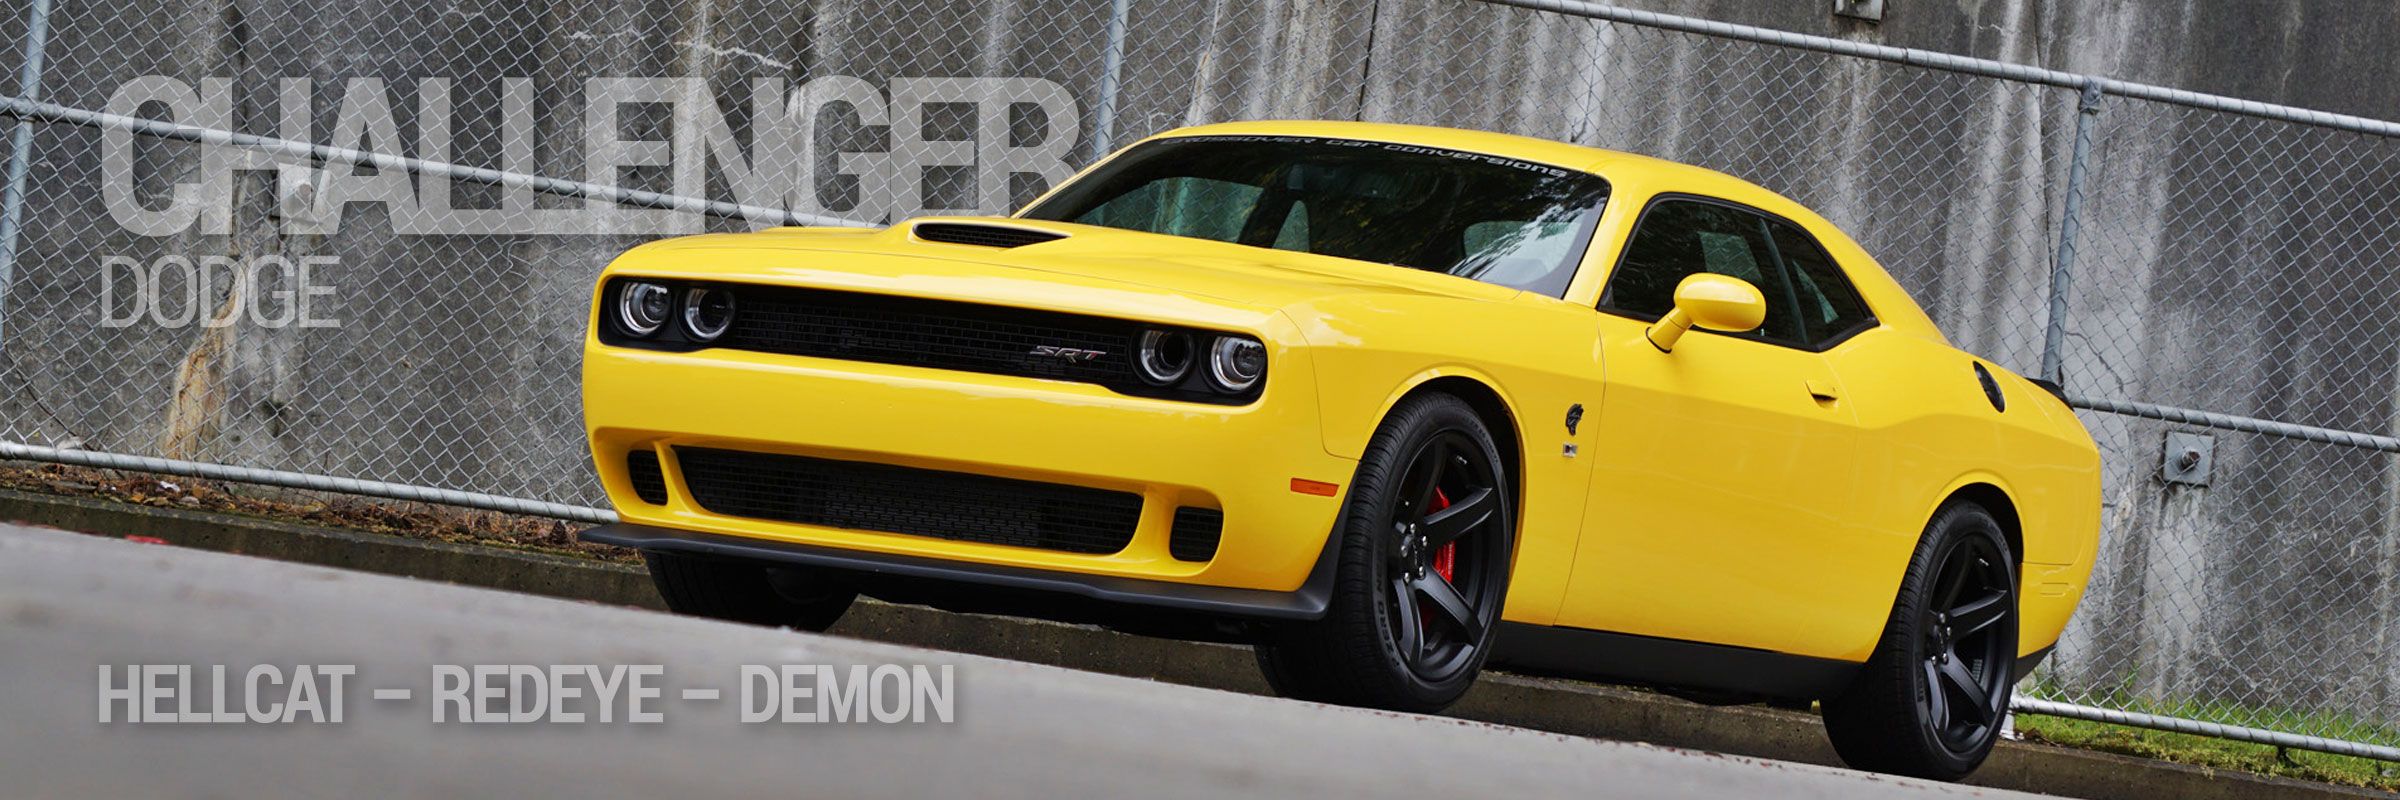 Dodge Challenger Right Hand Drive